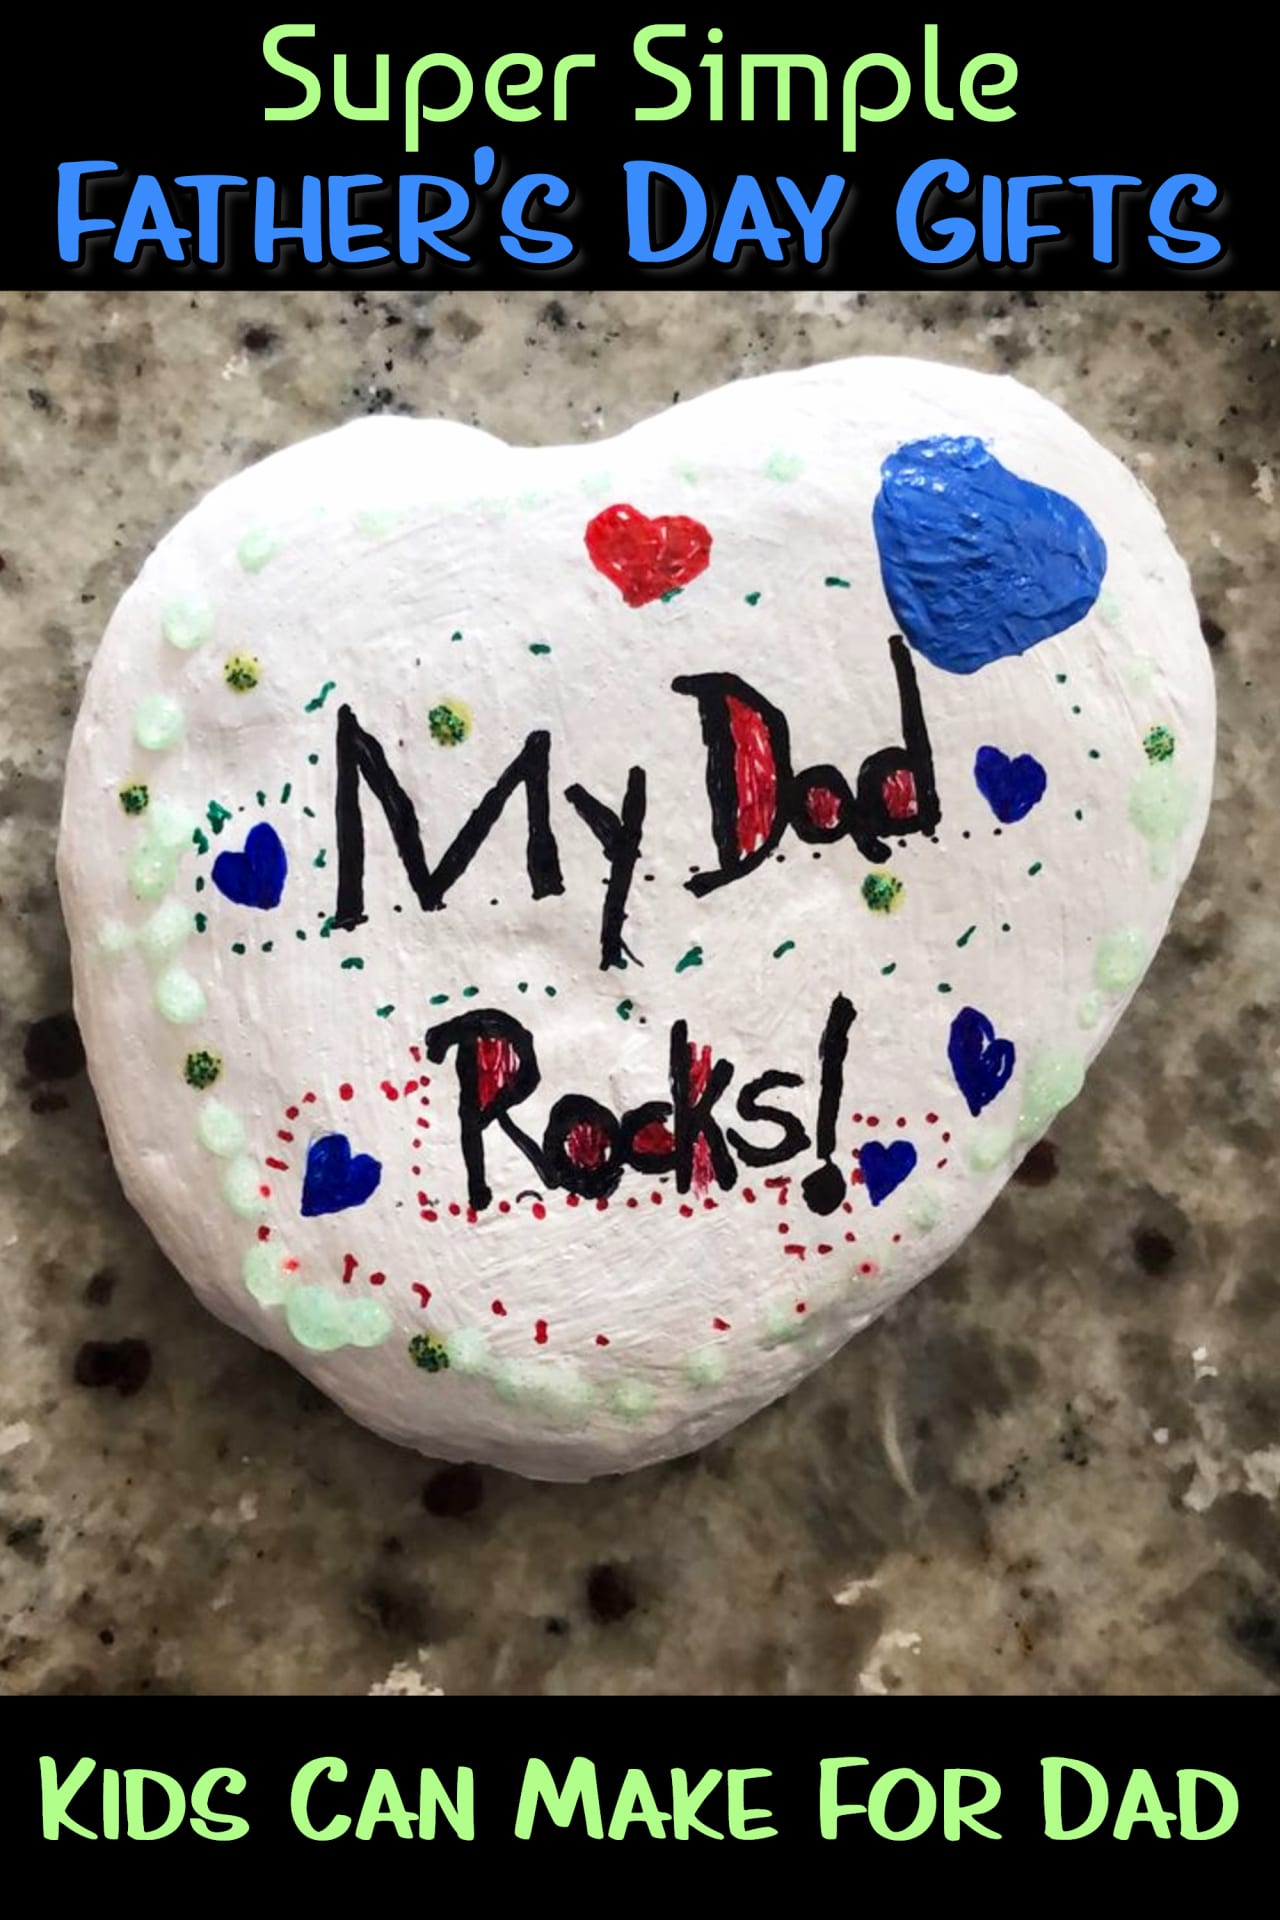 Super simple fathers day gifts from kids - easy Father's Day crafts for kids to make as gifts for Dad on Fathers Day or dads birthday